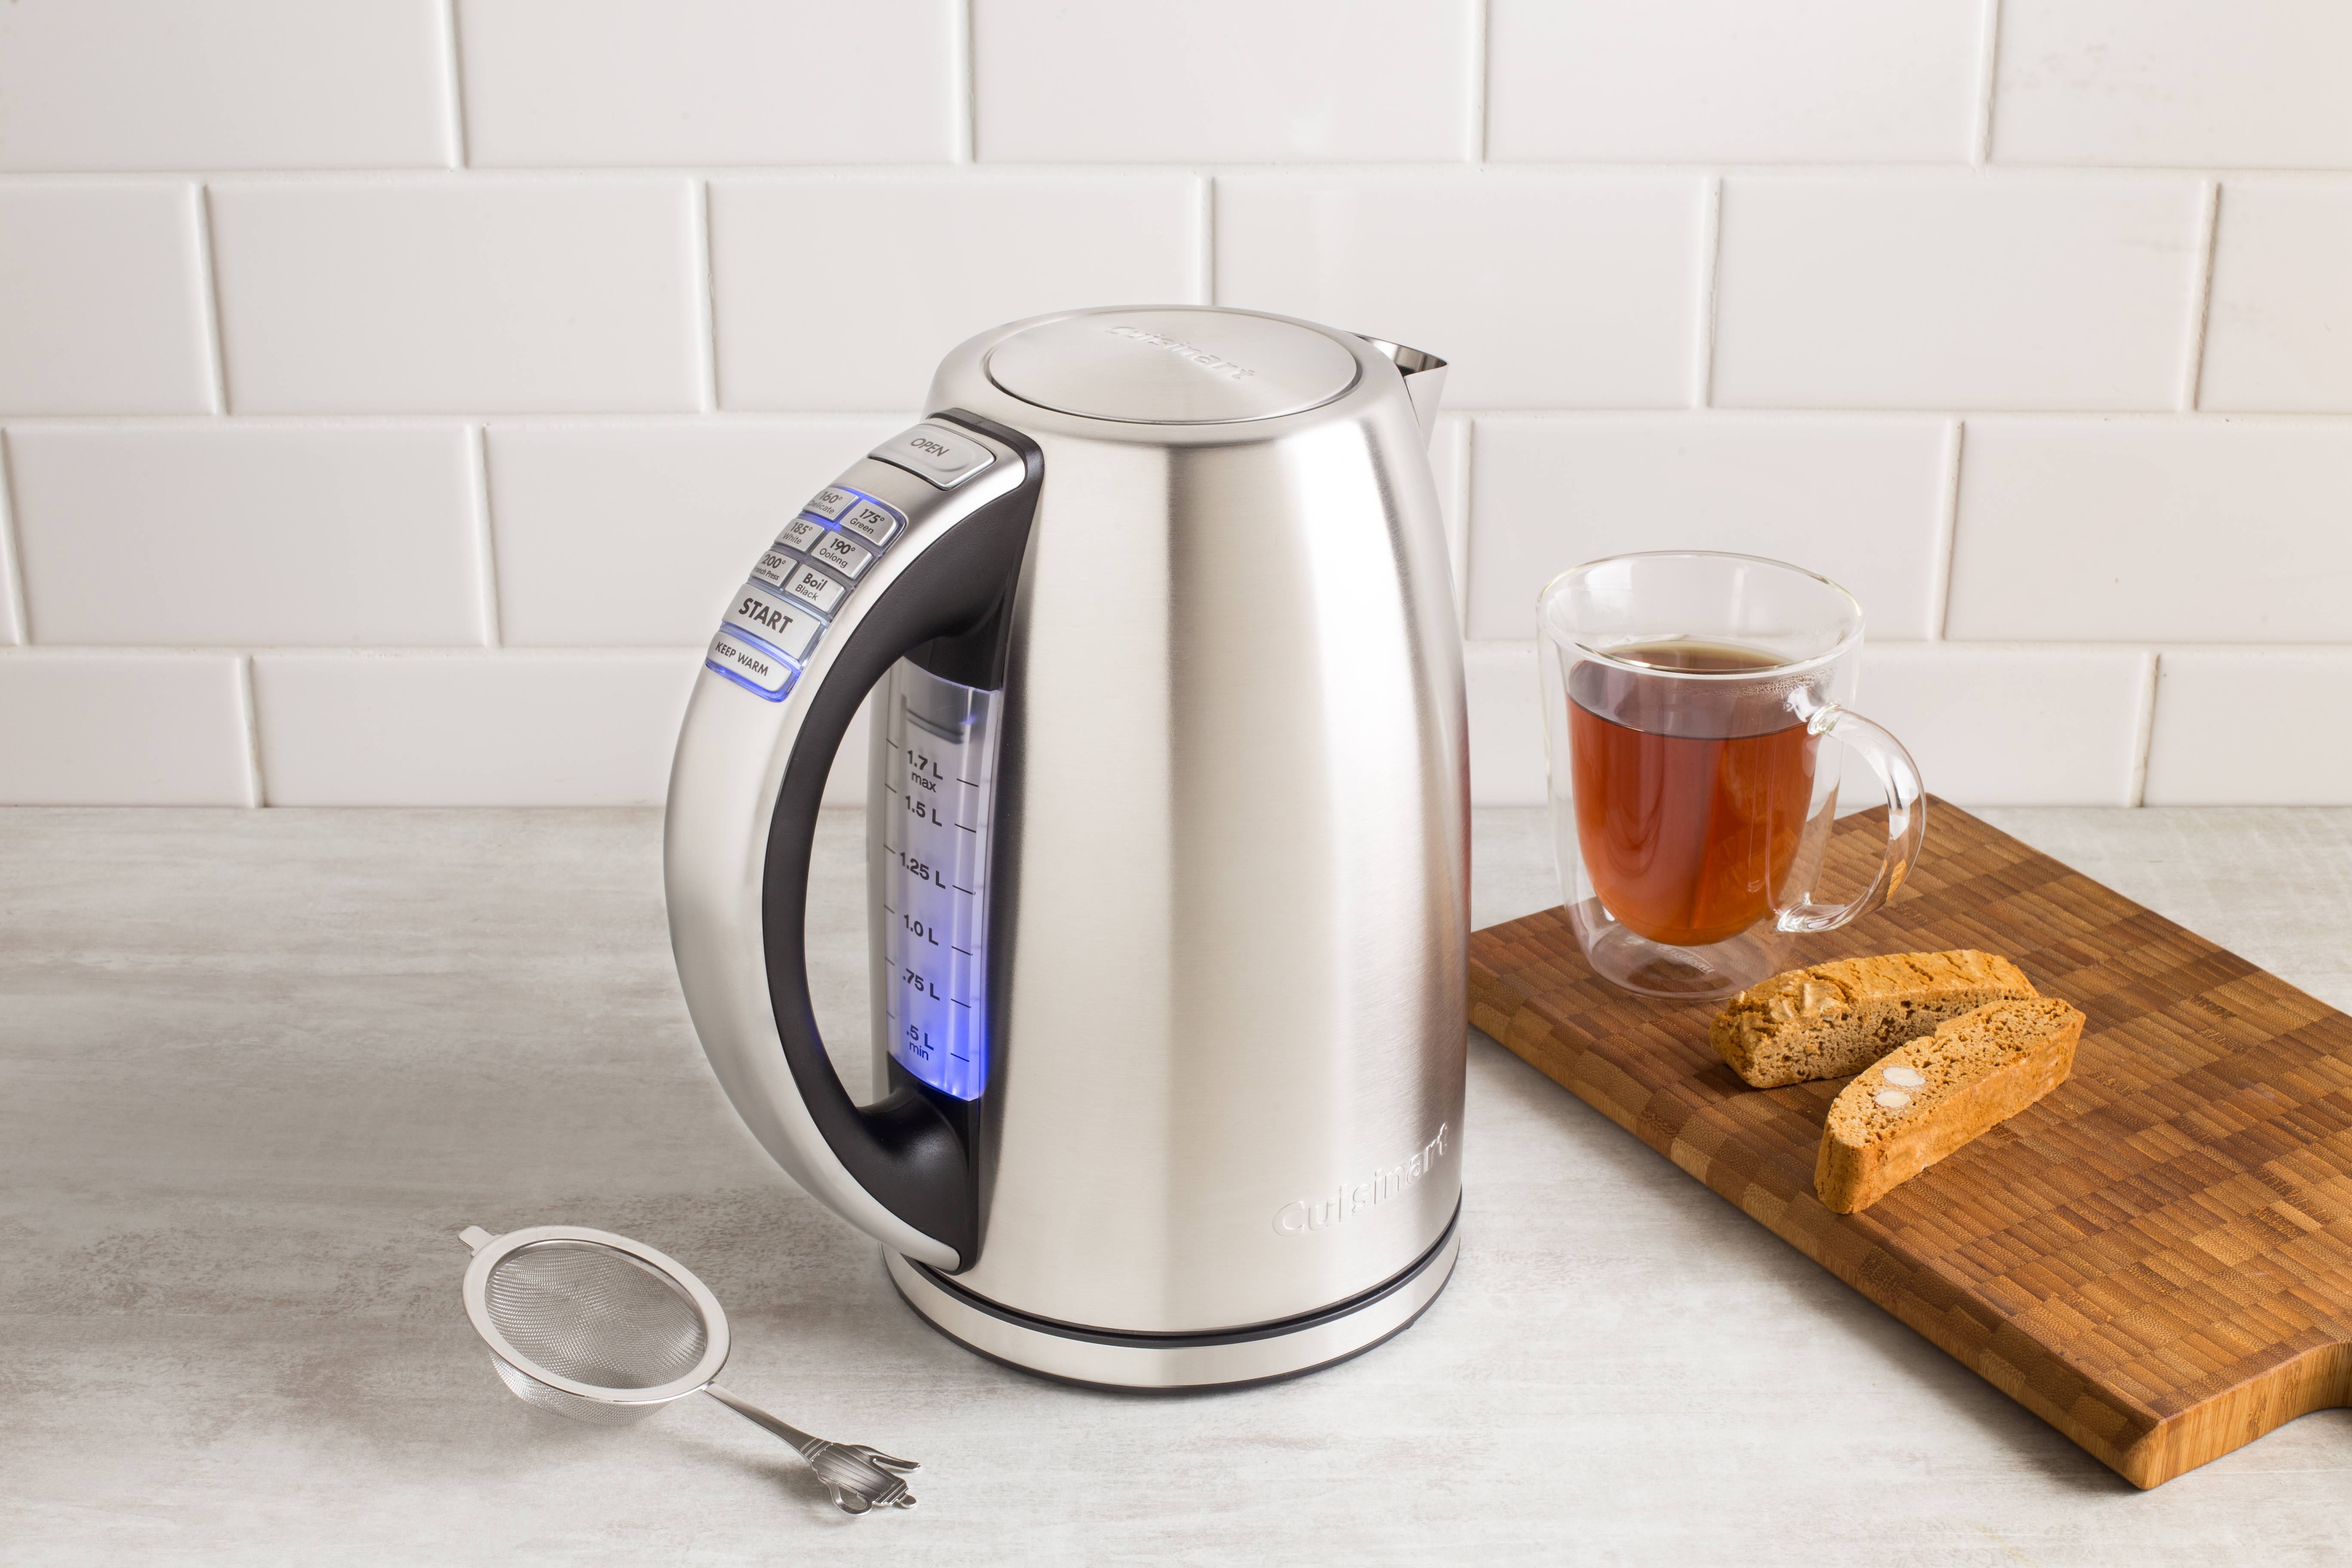 Cuisinart Perfectemp 1.7l Electric Programmable Kettle - Stainless